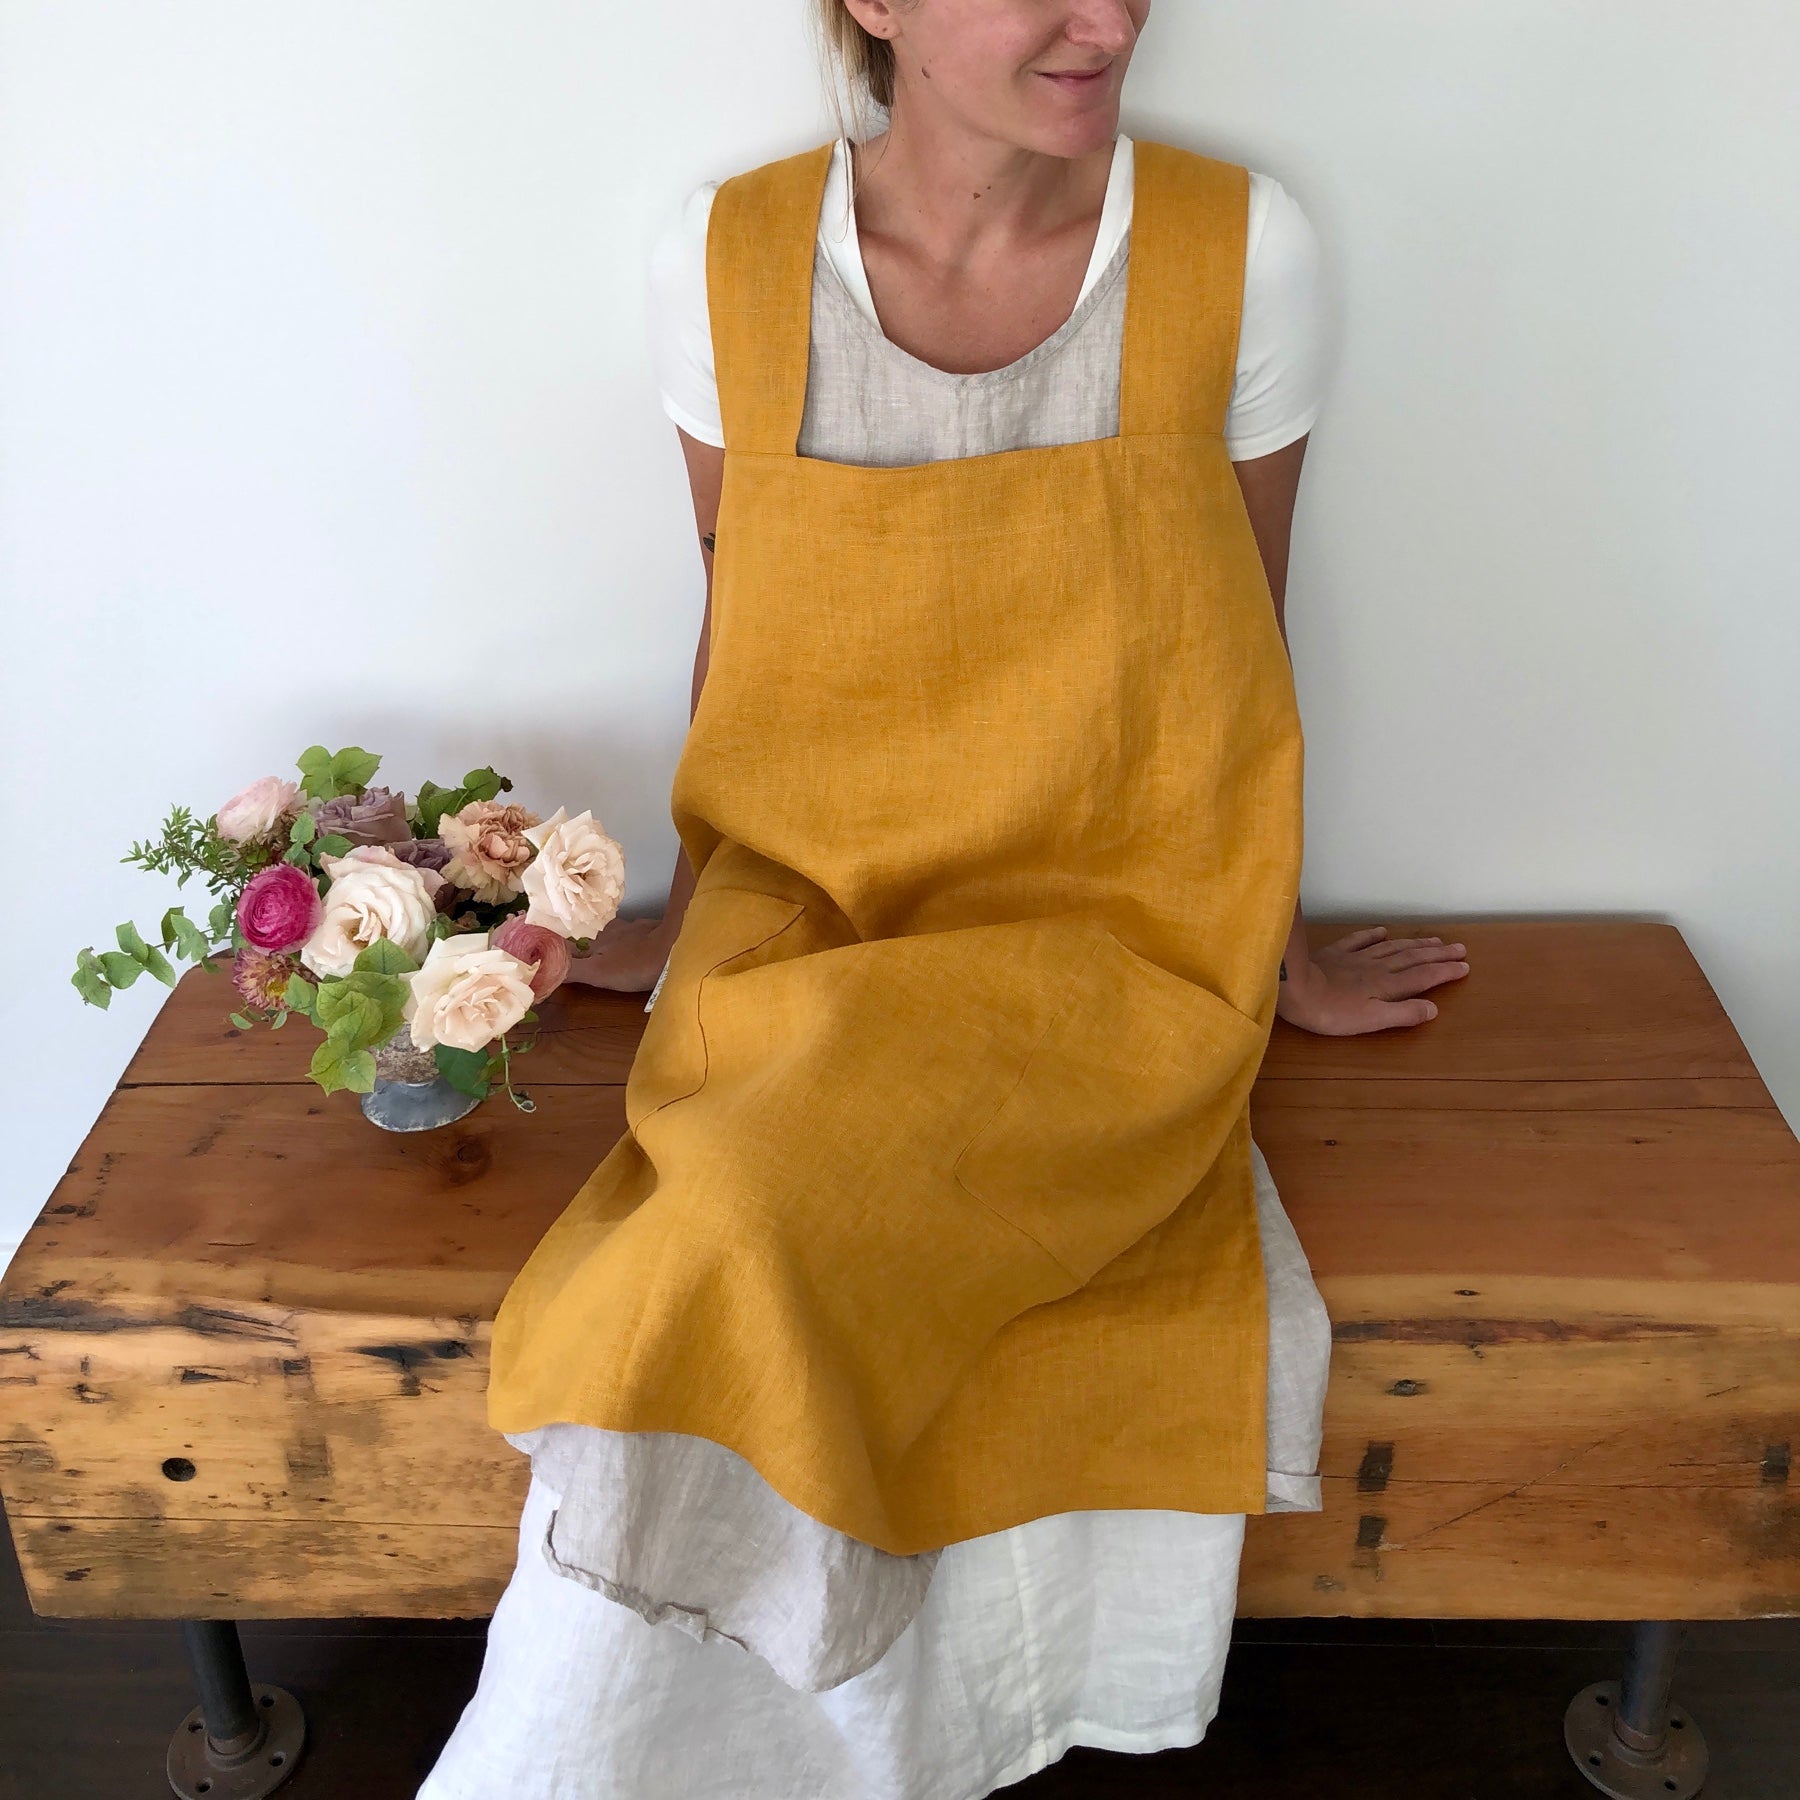 Image of a model wearing a golden yellow apron